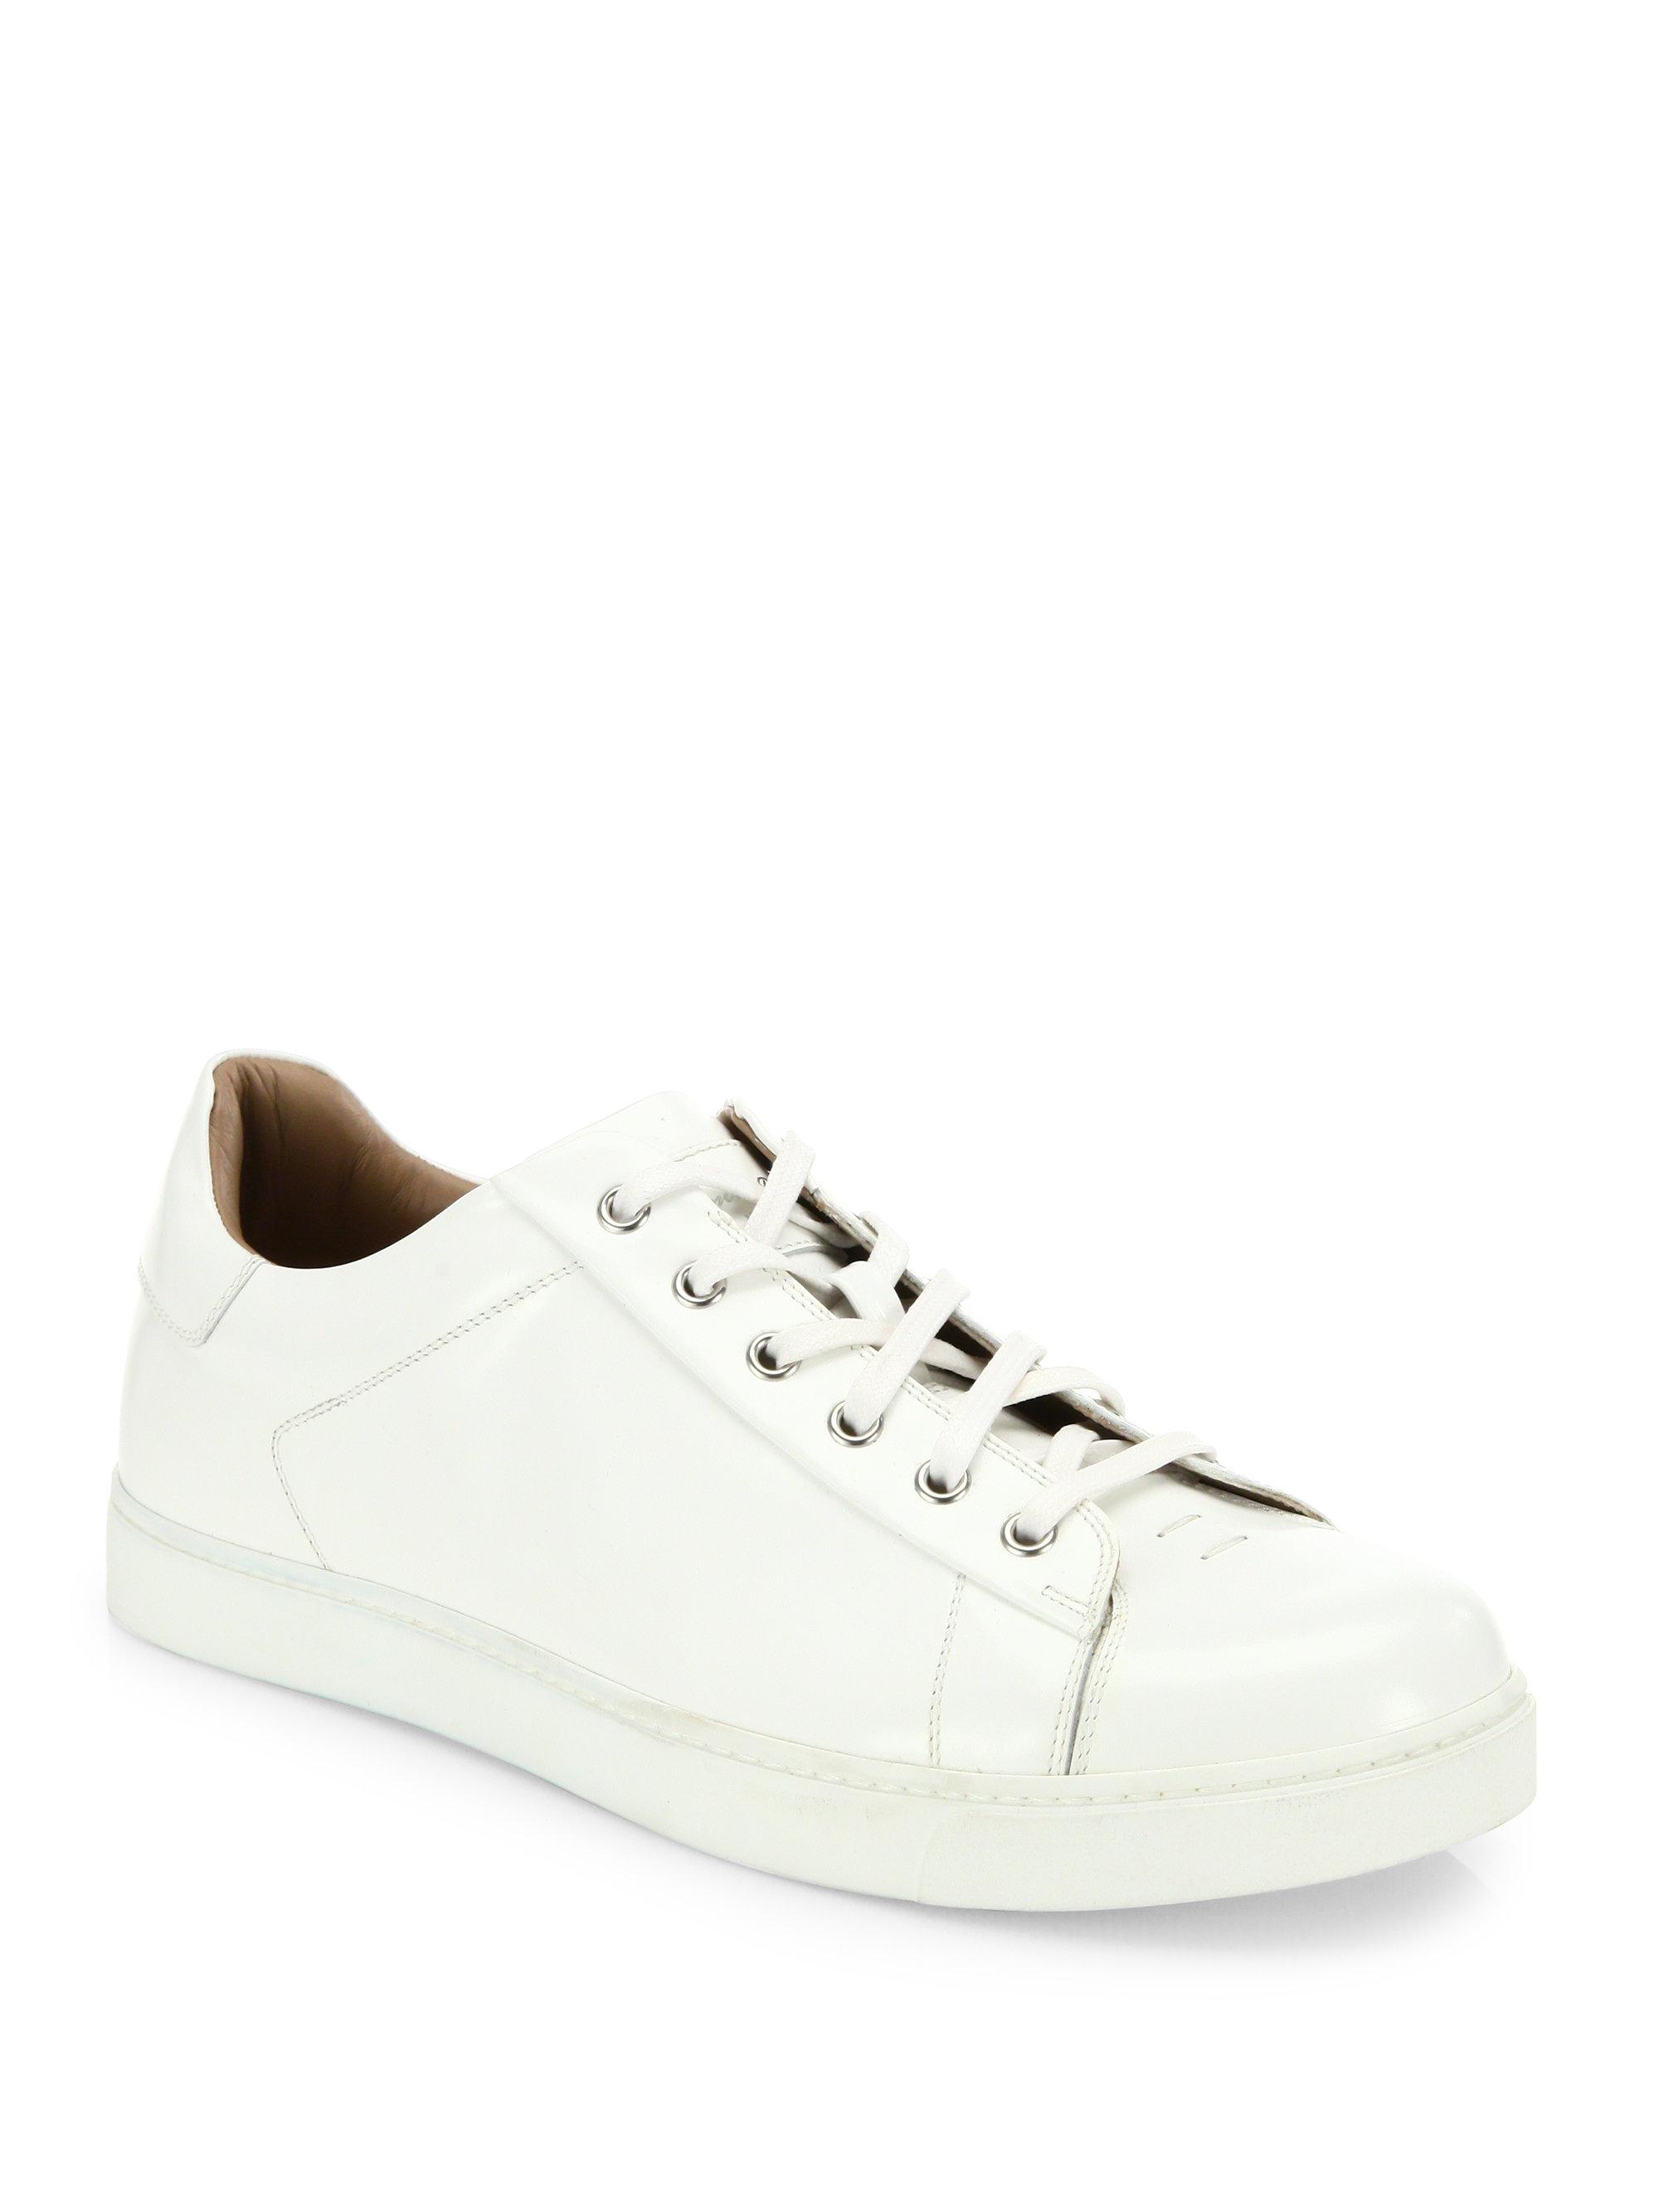 Lyst - Gianvito Rossi Solid Leather Low-top Sneakers in White